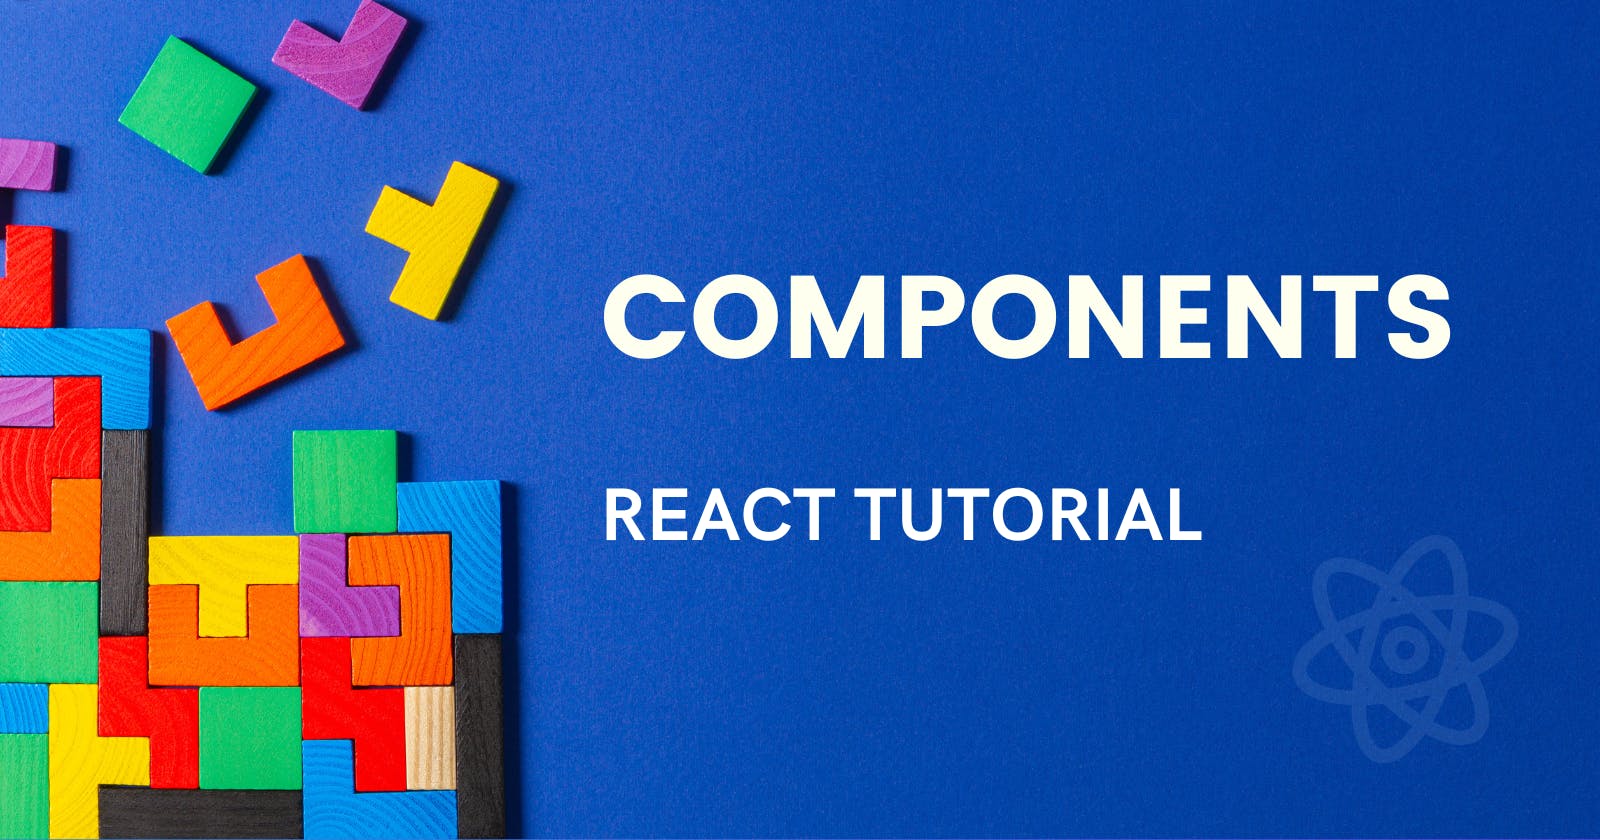 Components: The building blocks in React